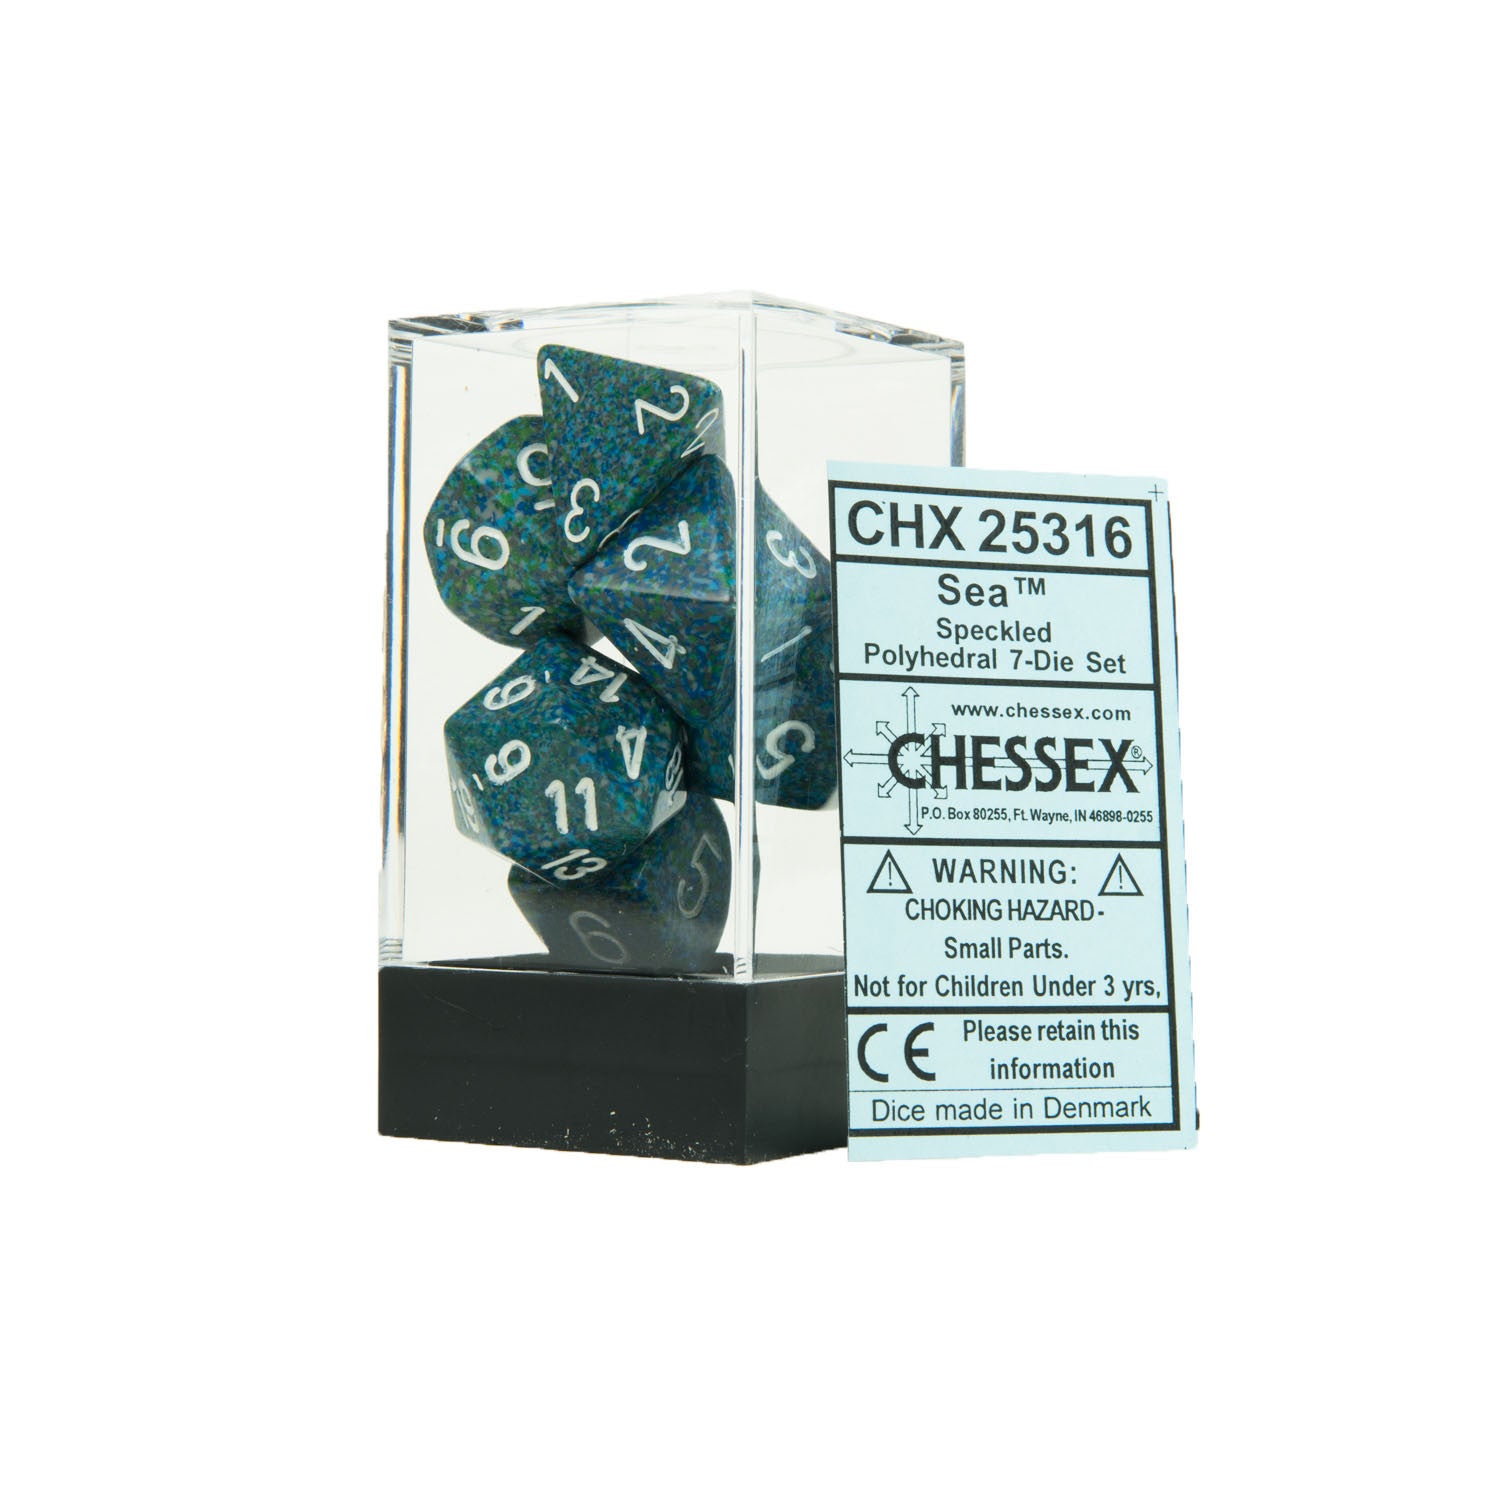 Chessex CHX25316 Sea™ Speckled Polyhedral Dice Set